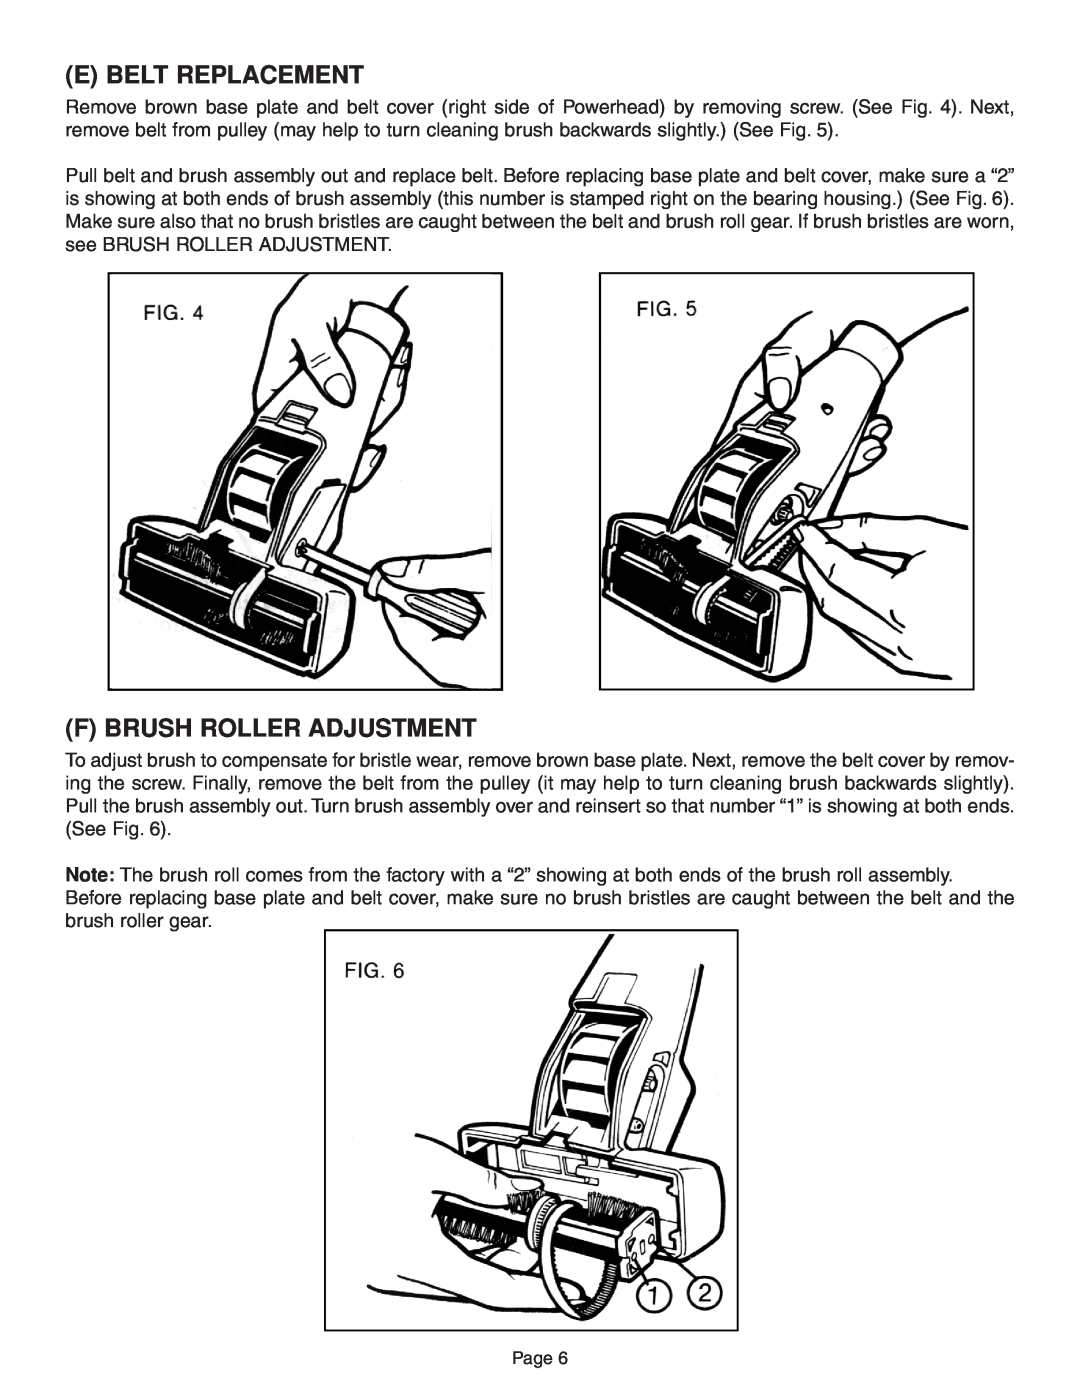 H-P Products T210, 7161 instruction manual E Belt Replacement, F Brush Roller Adjustment 